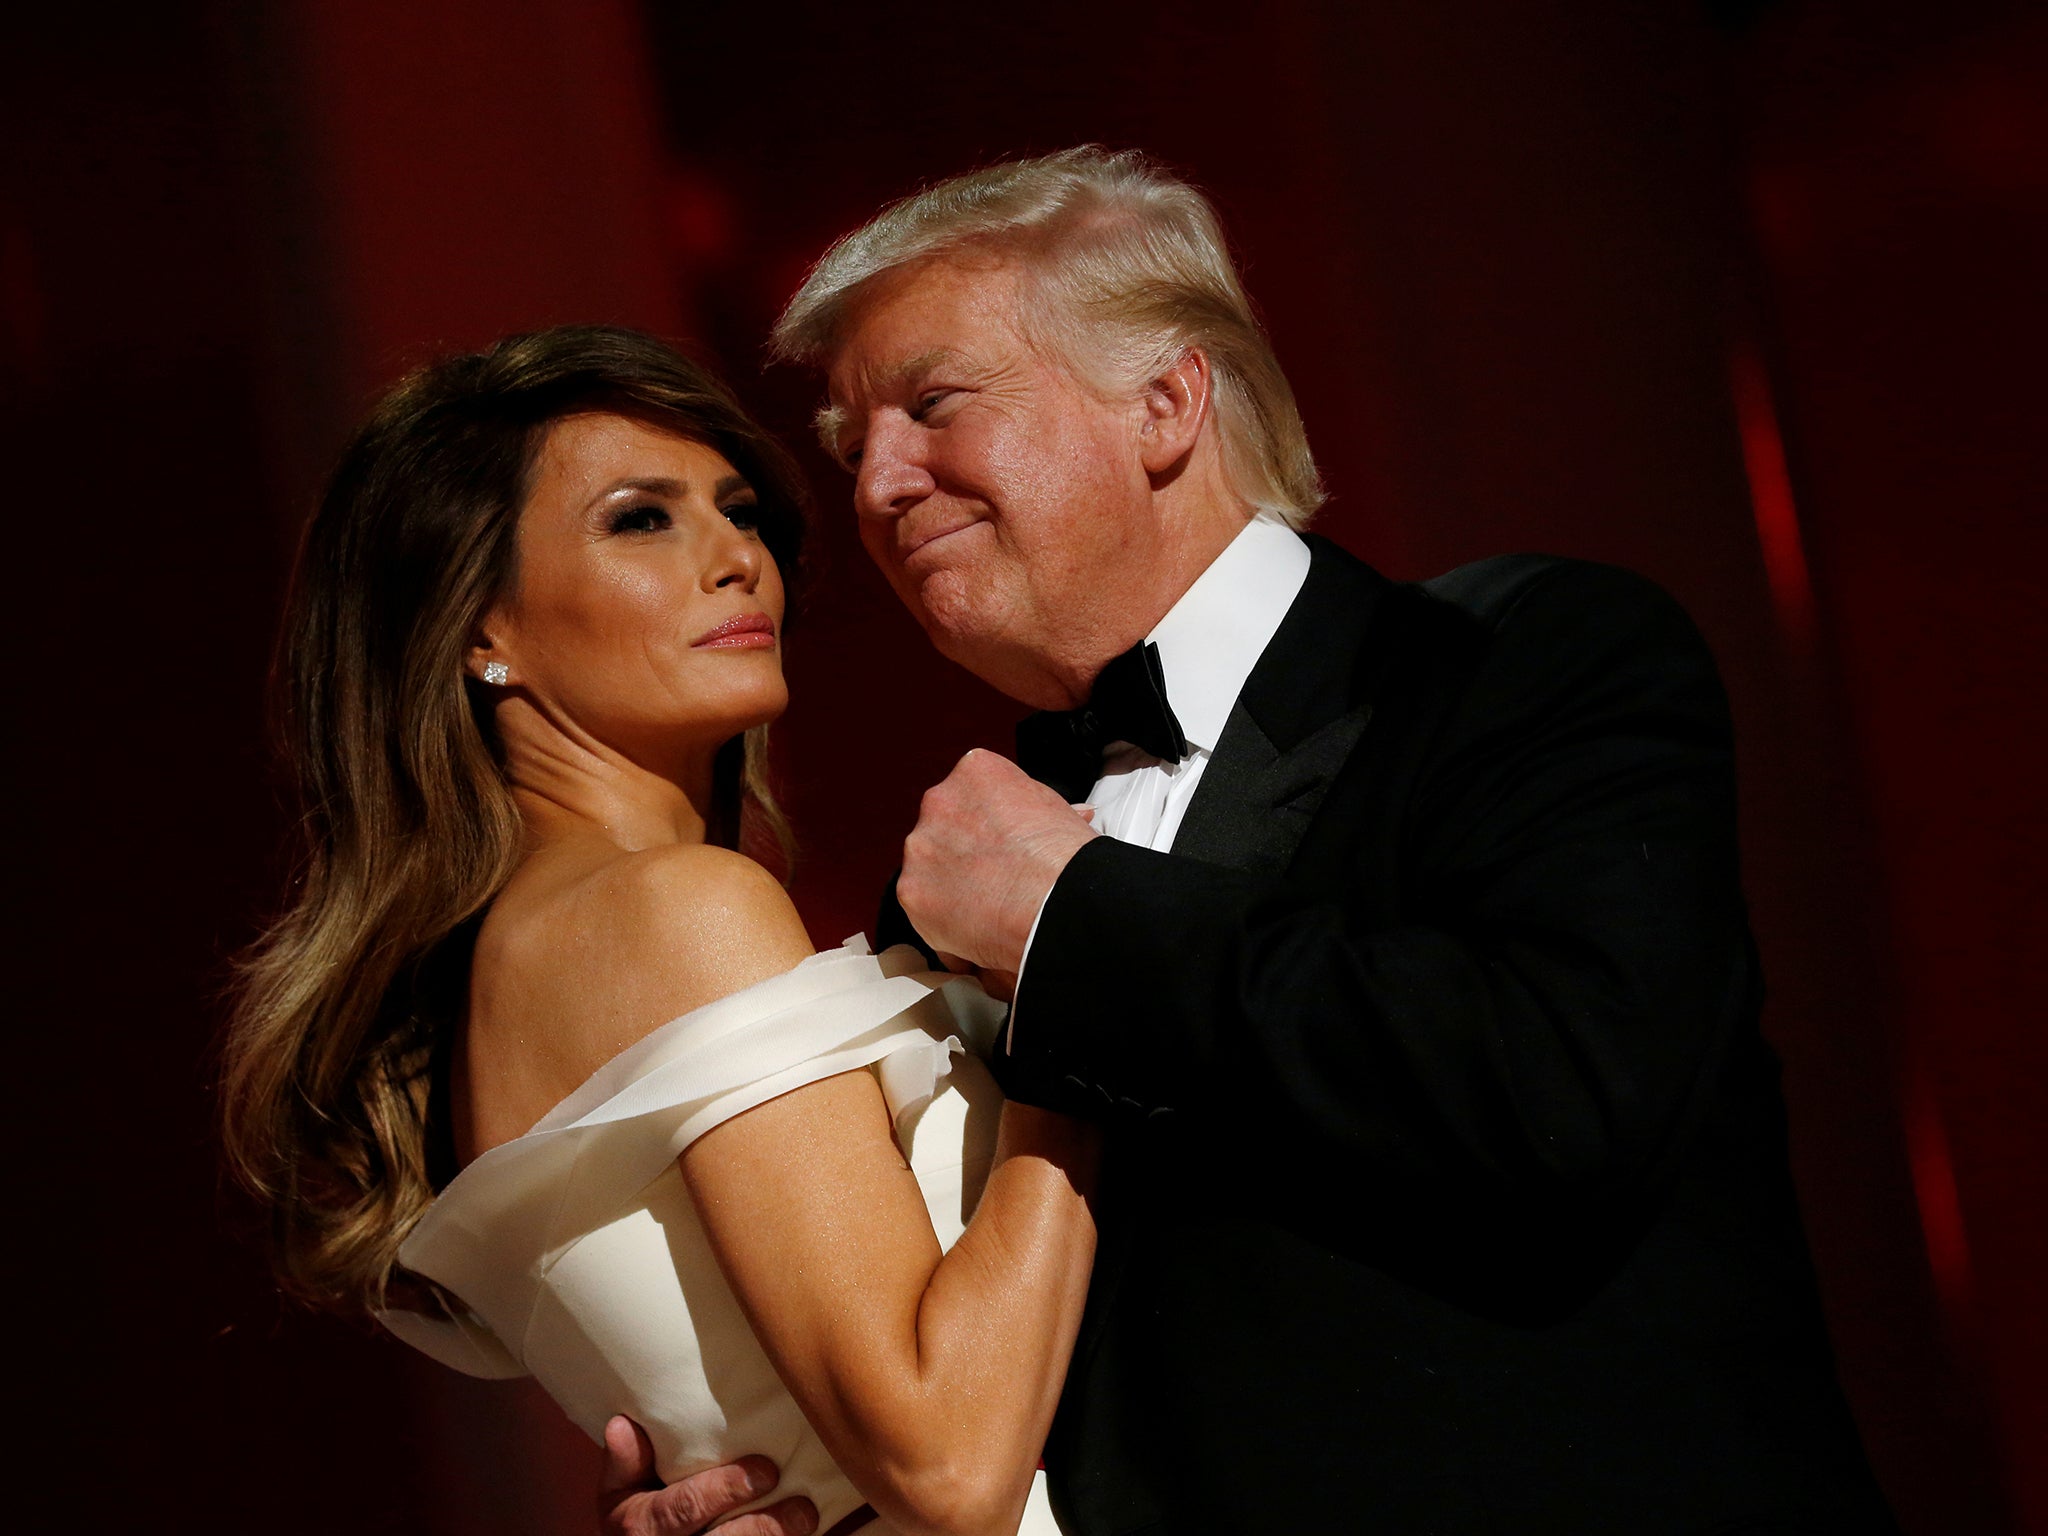 US President Donald Trump and first lady Melania Trump attend the Liberty Ball in honour of his inauguration